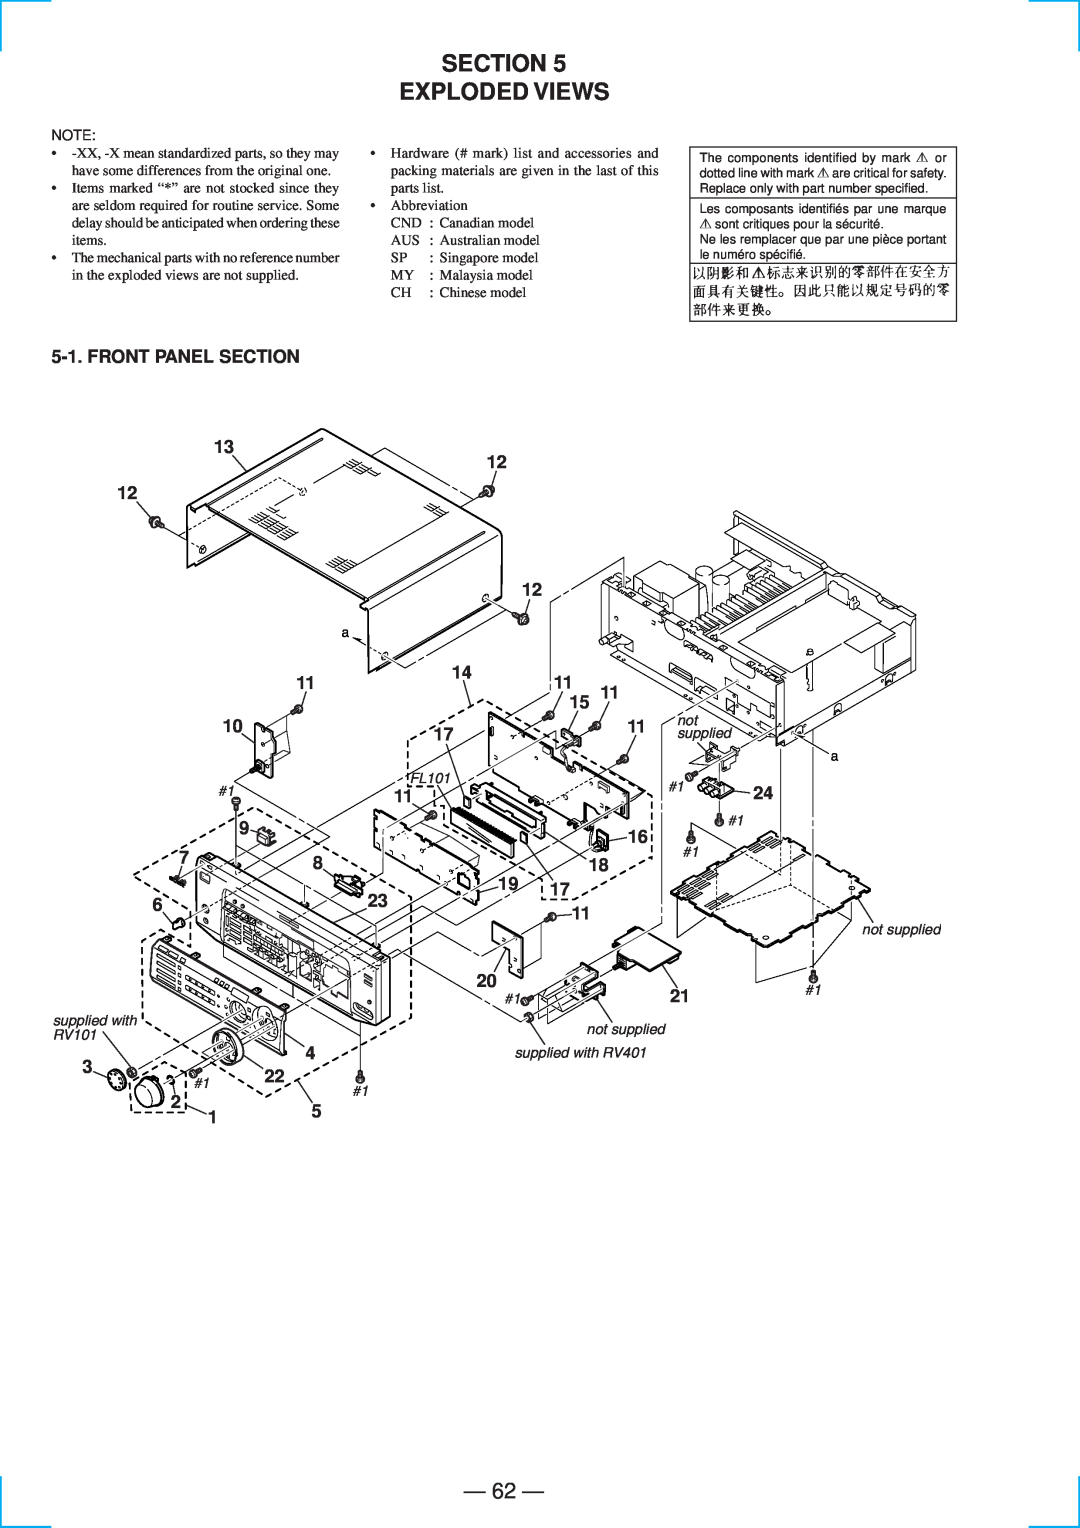 Sony STR-DE835 specifications Section Exploded Views, 62, FRONT PANEL 12 12, 9 7 6 